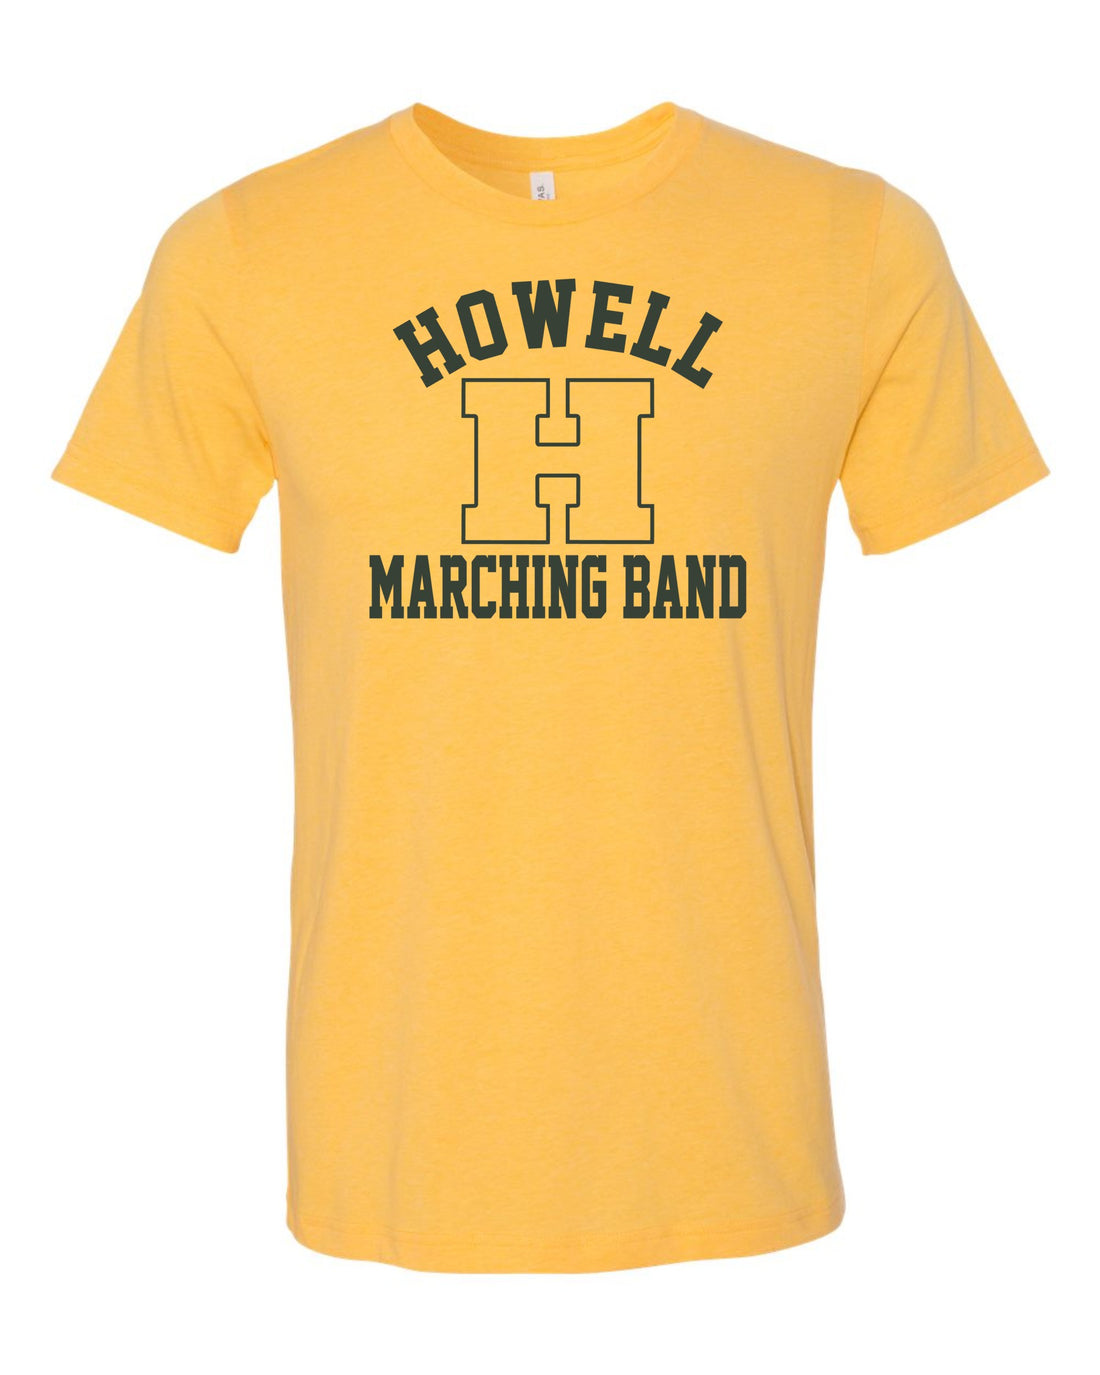 Howell Marching Band Premium Tee